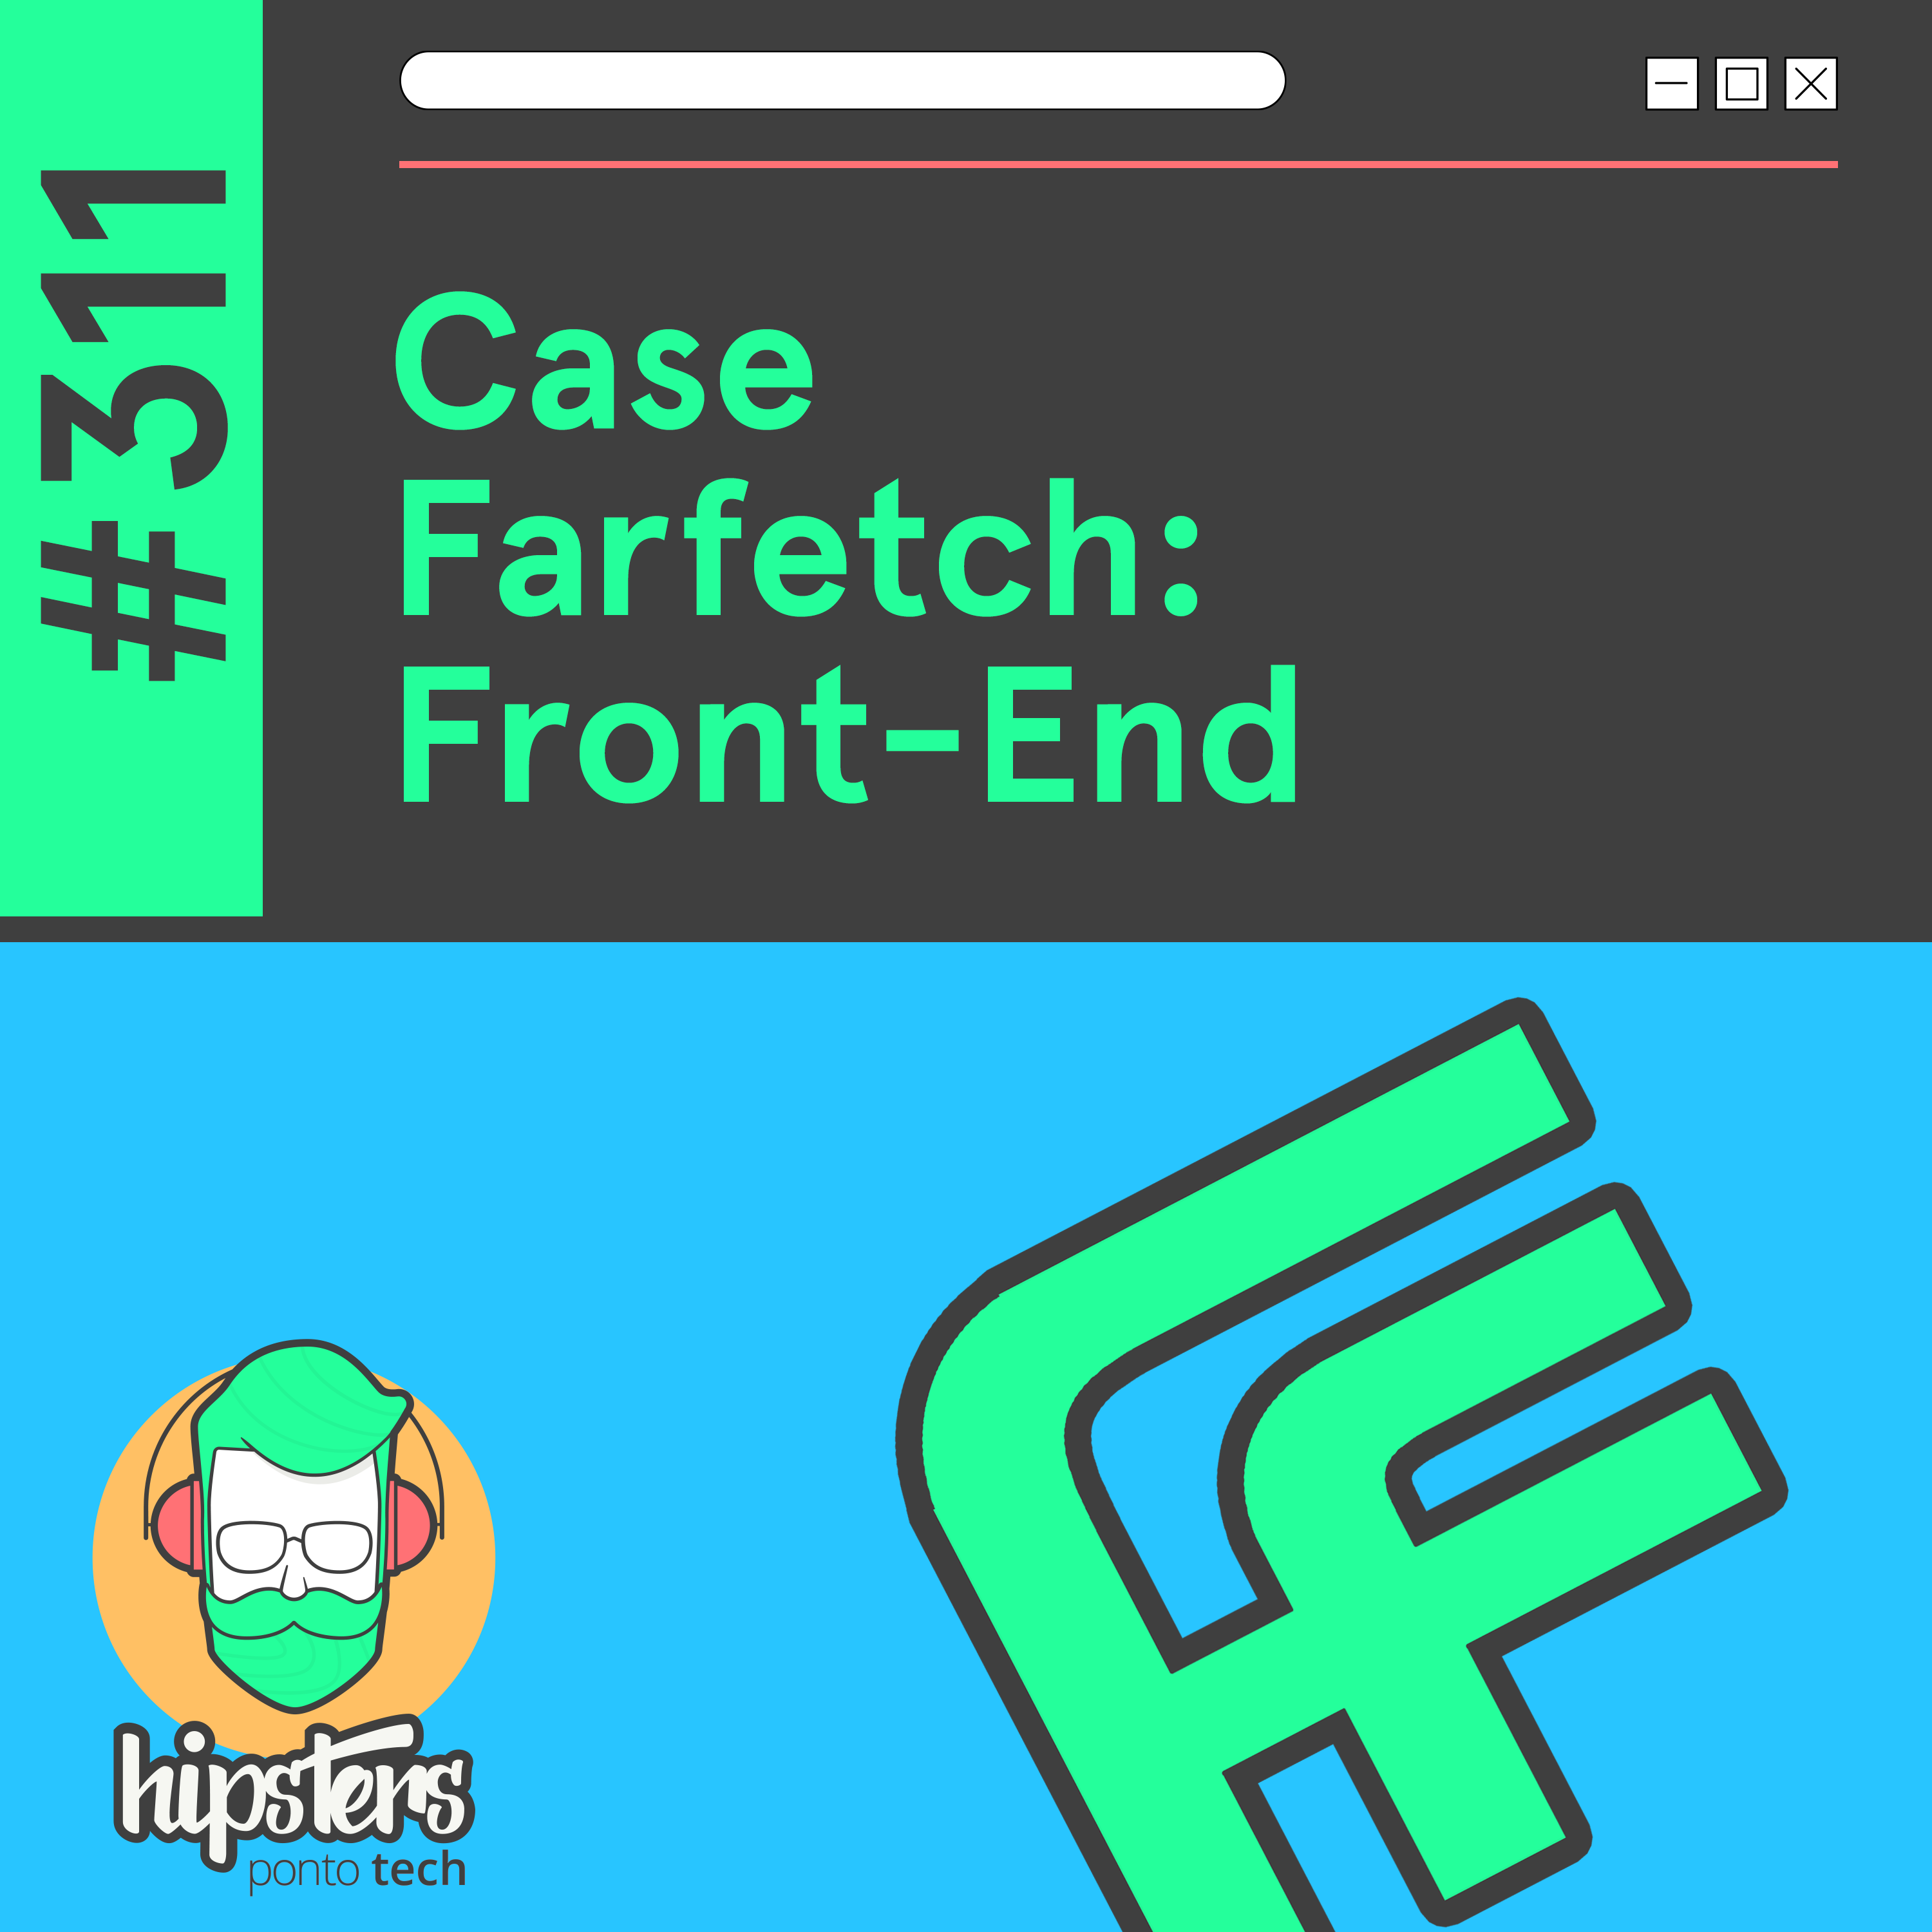 Hipsters Ponto Tech - Case Farfetch: Front-End